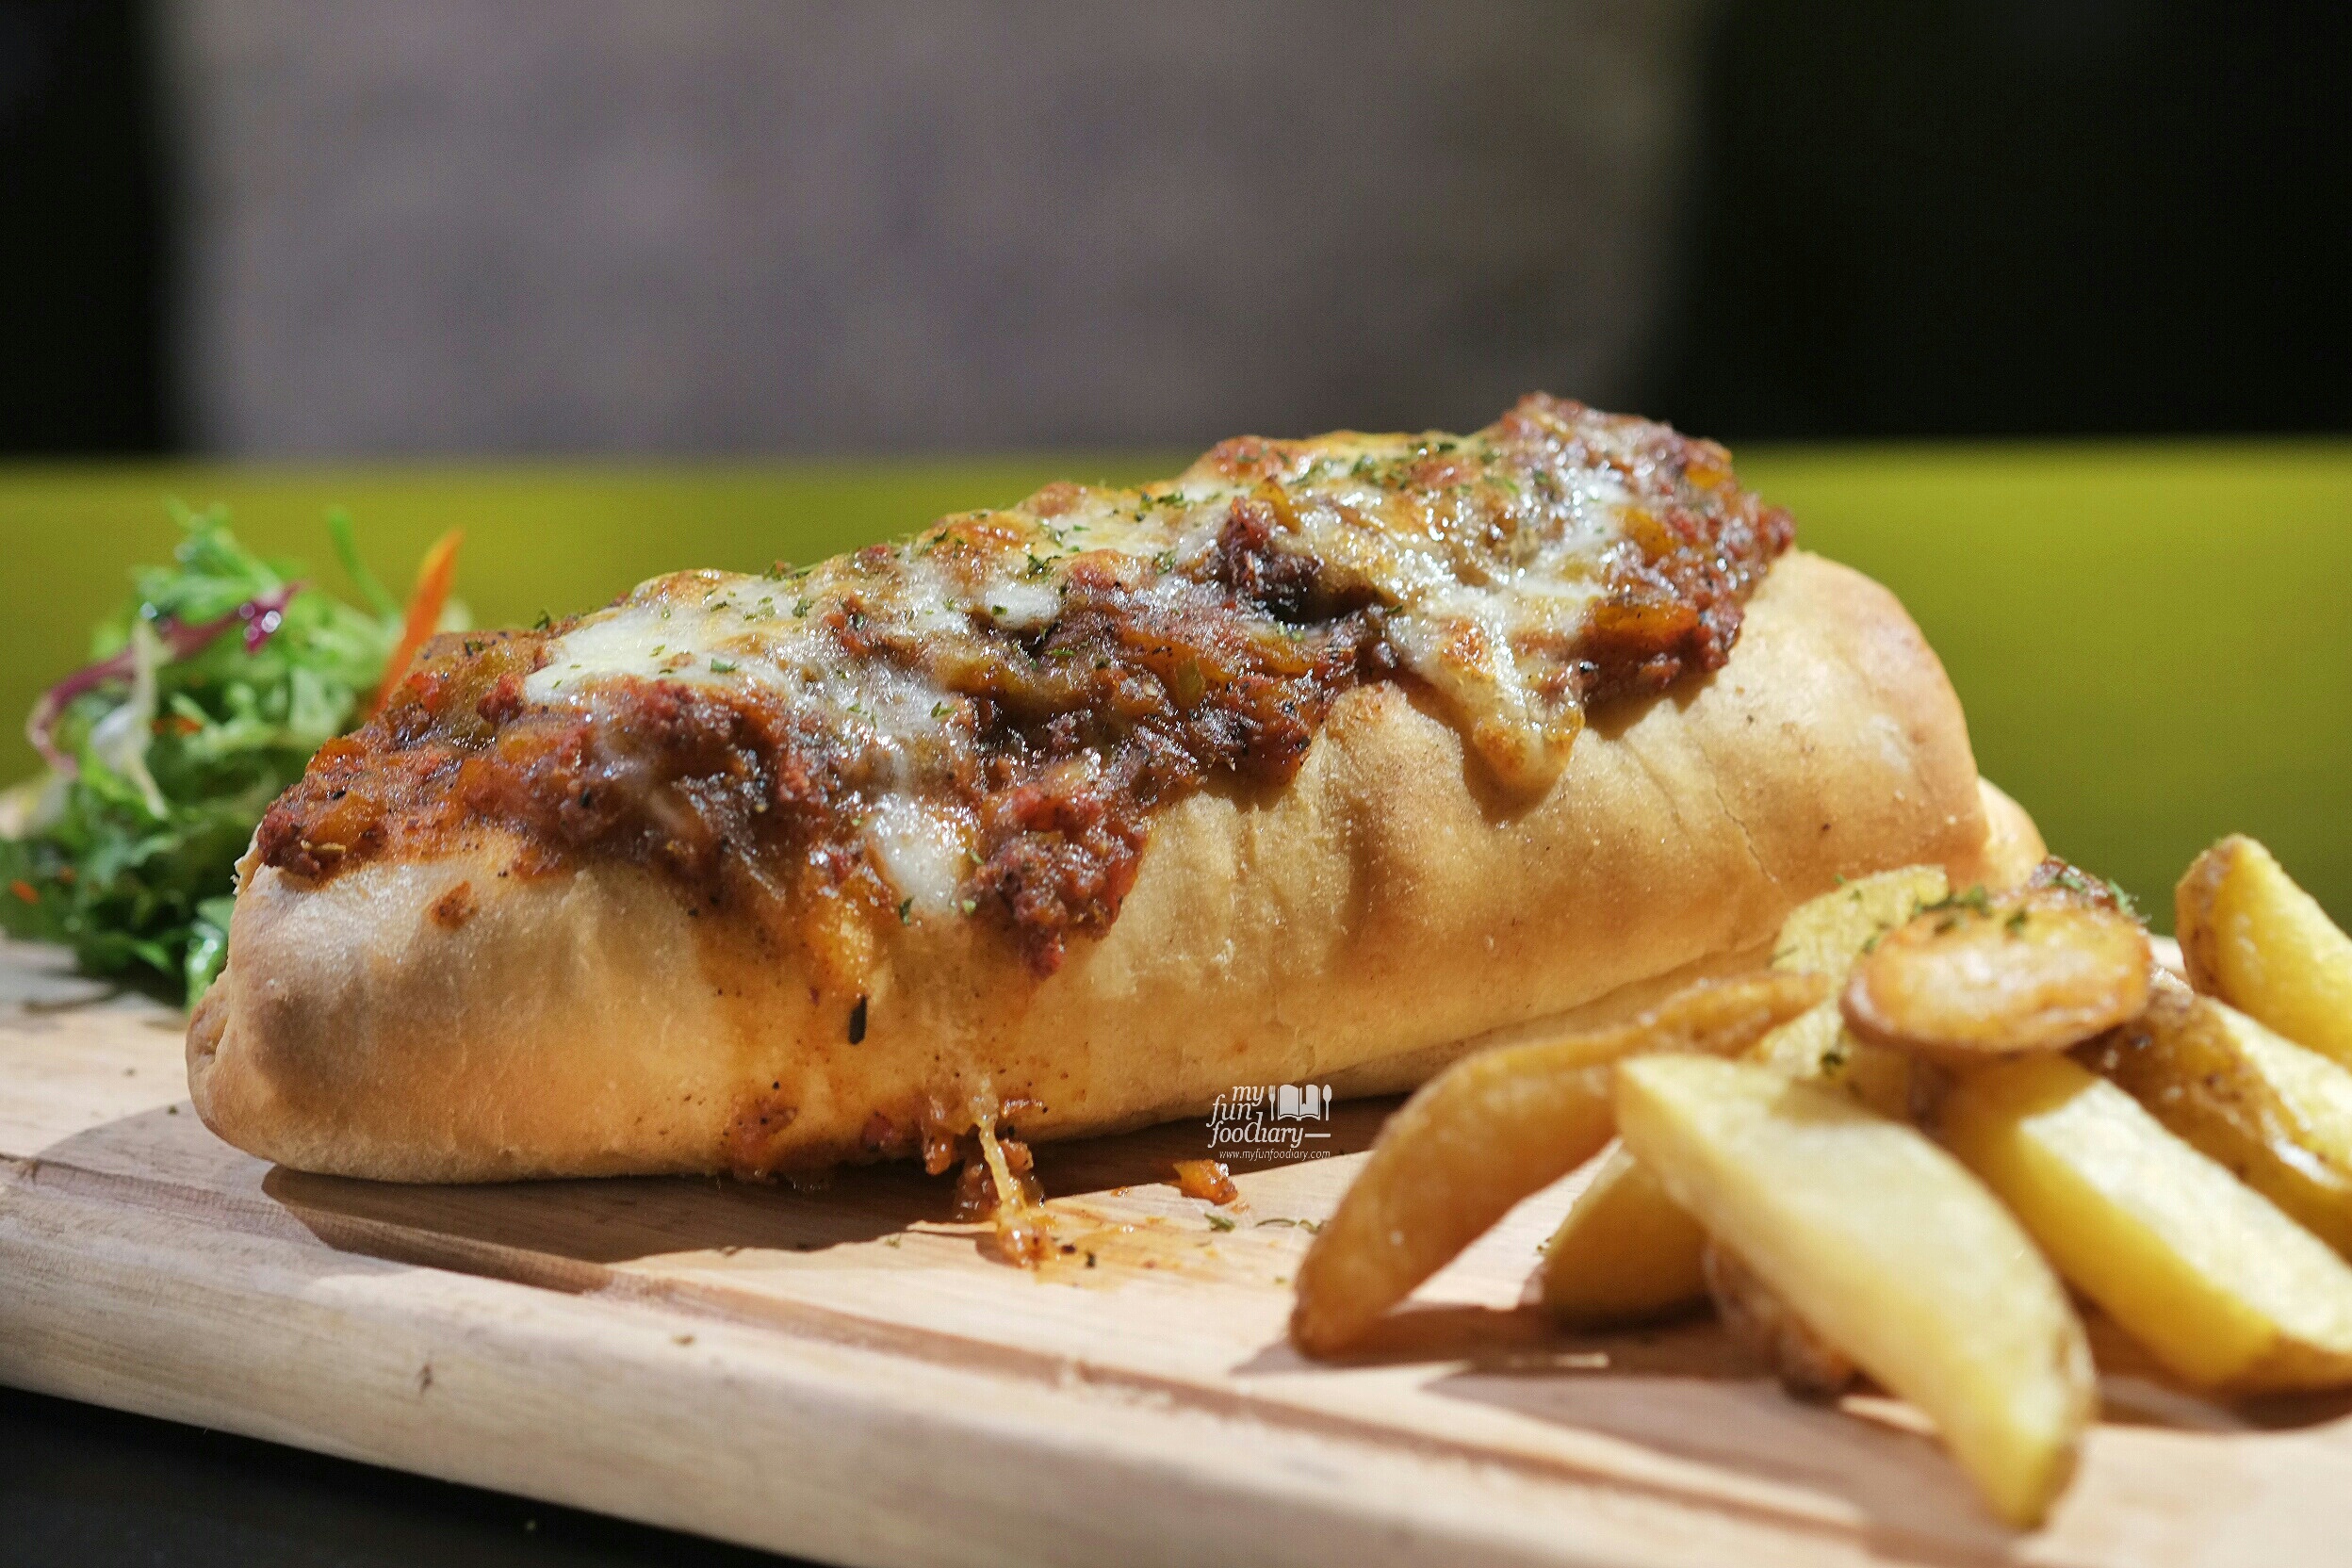 Meatball Sub at Commune Bistro and Grill by Myfunfoodiary